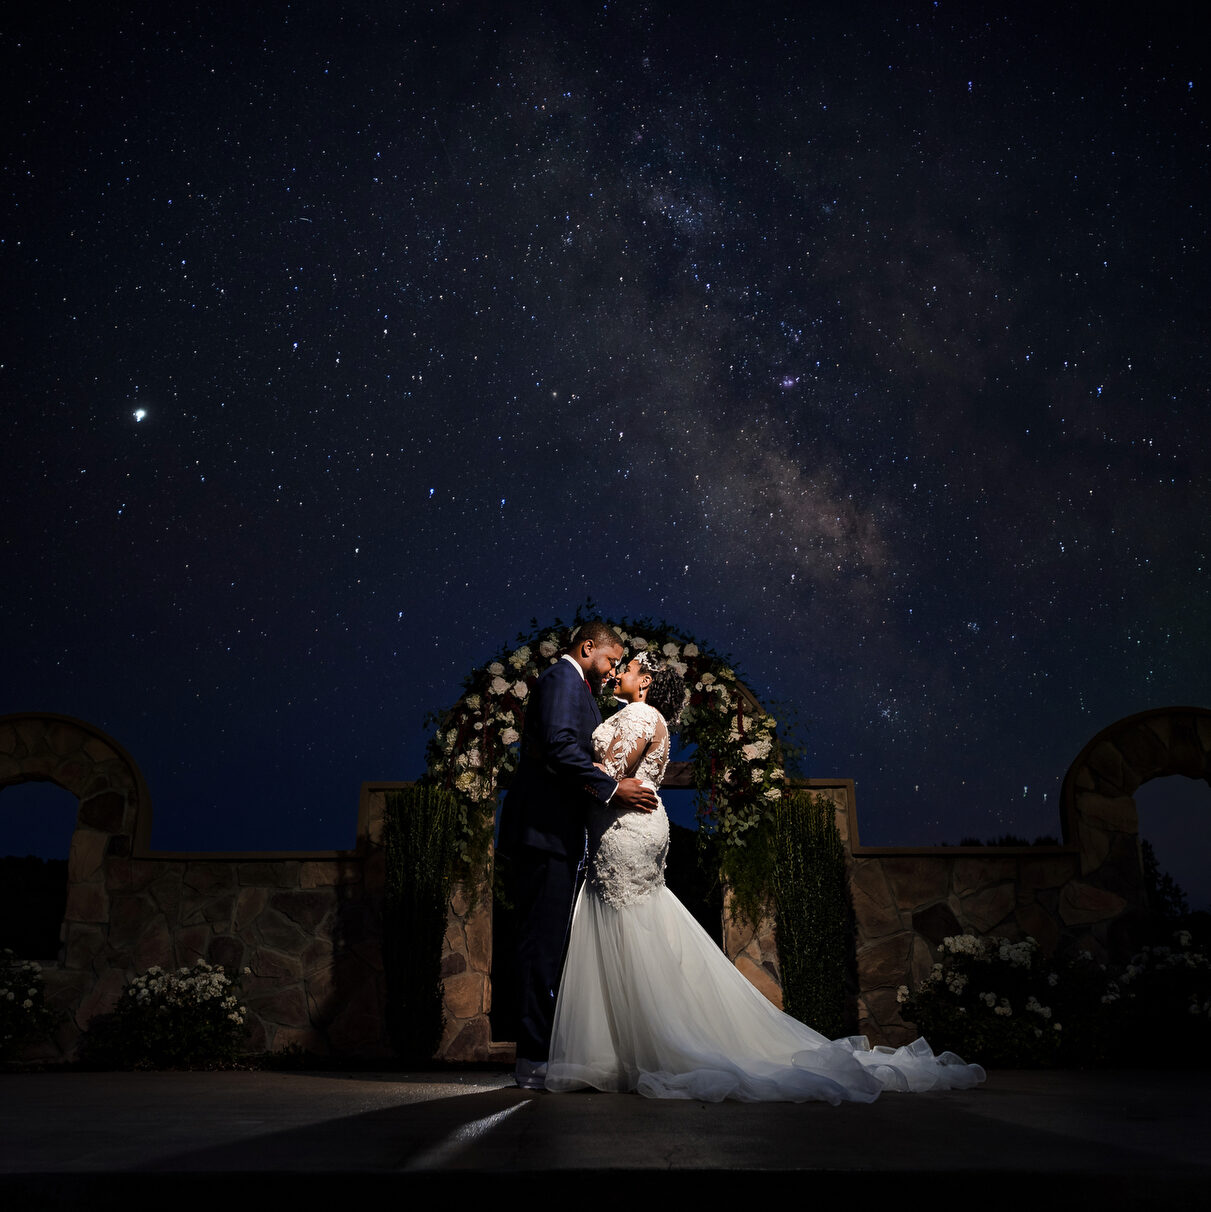 Bride and Groom holding each other with the stars and skies above them